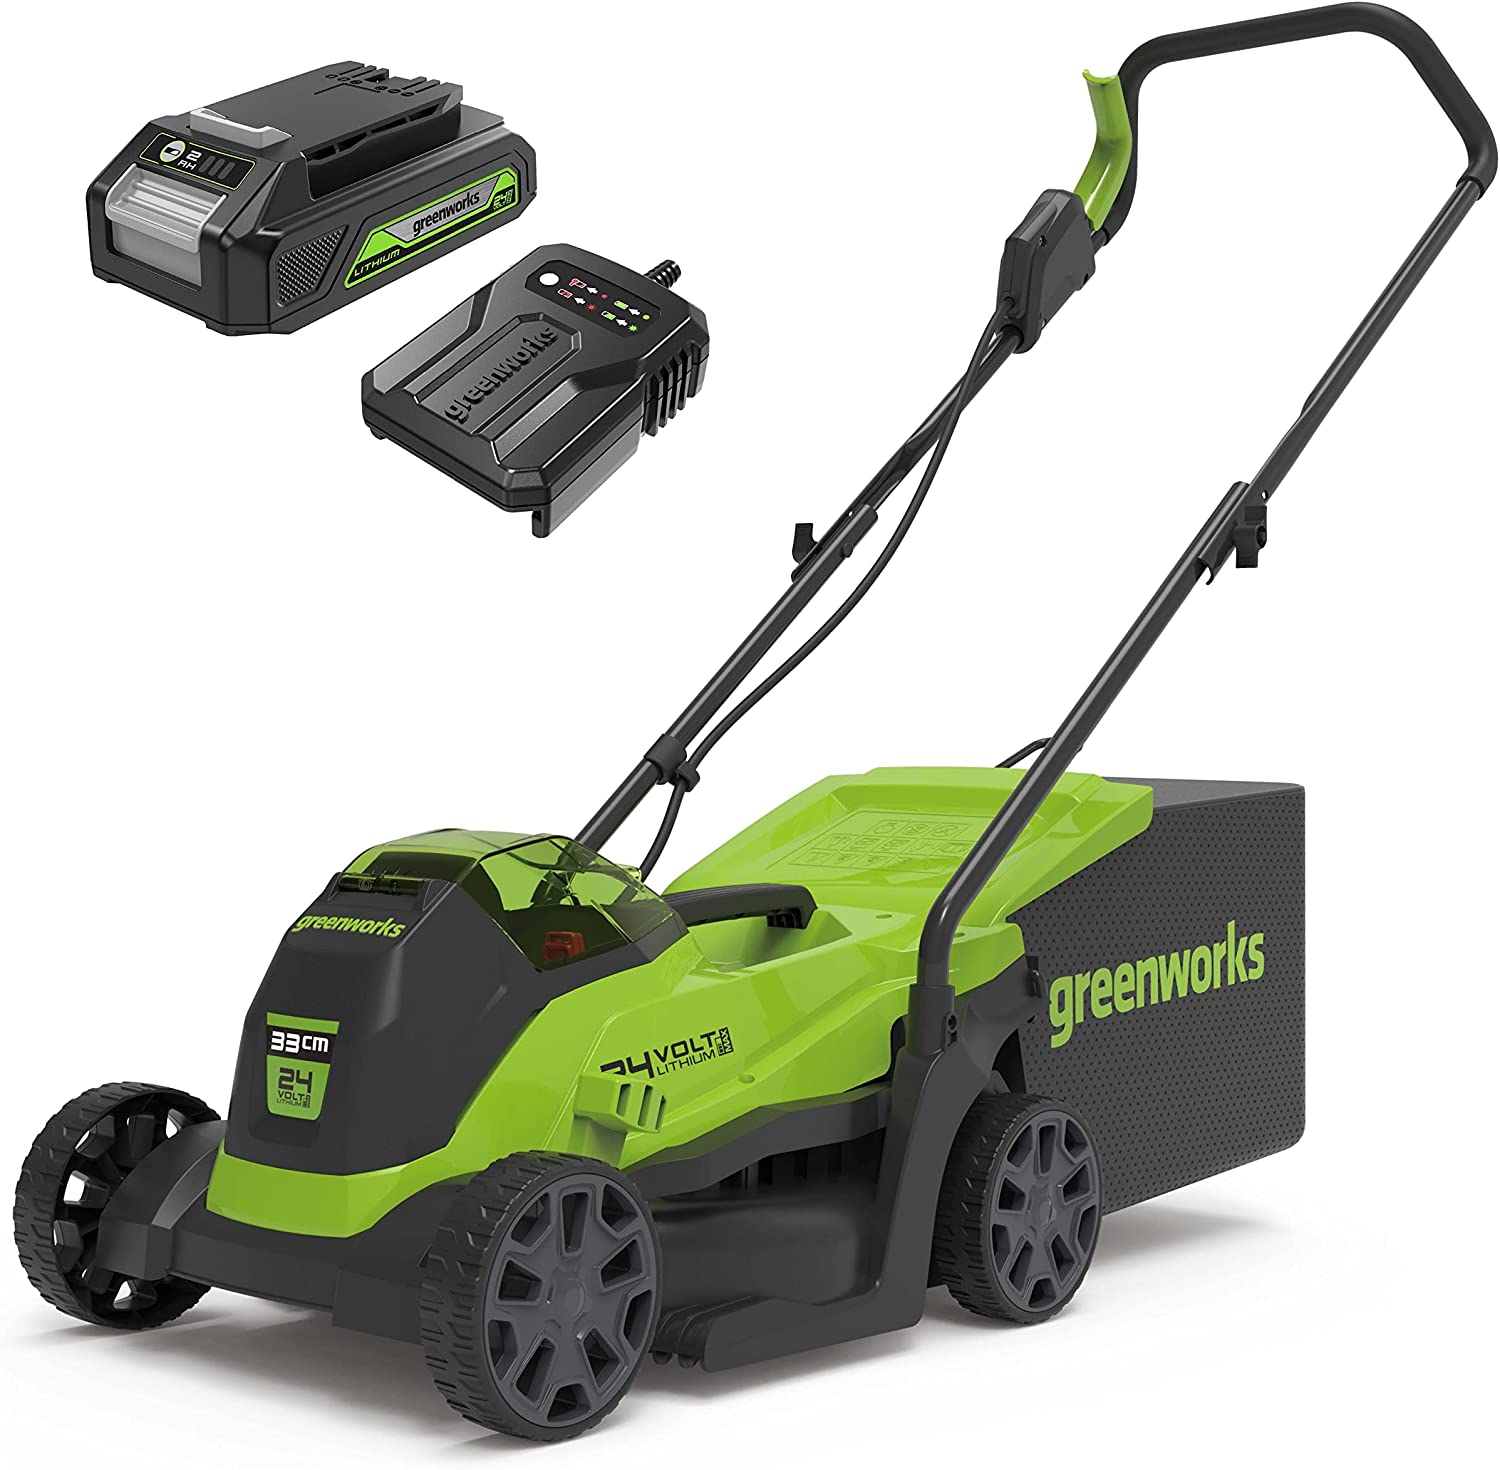 Greenworks GD24LM33K2 Cordless Lawnmower and battery